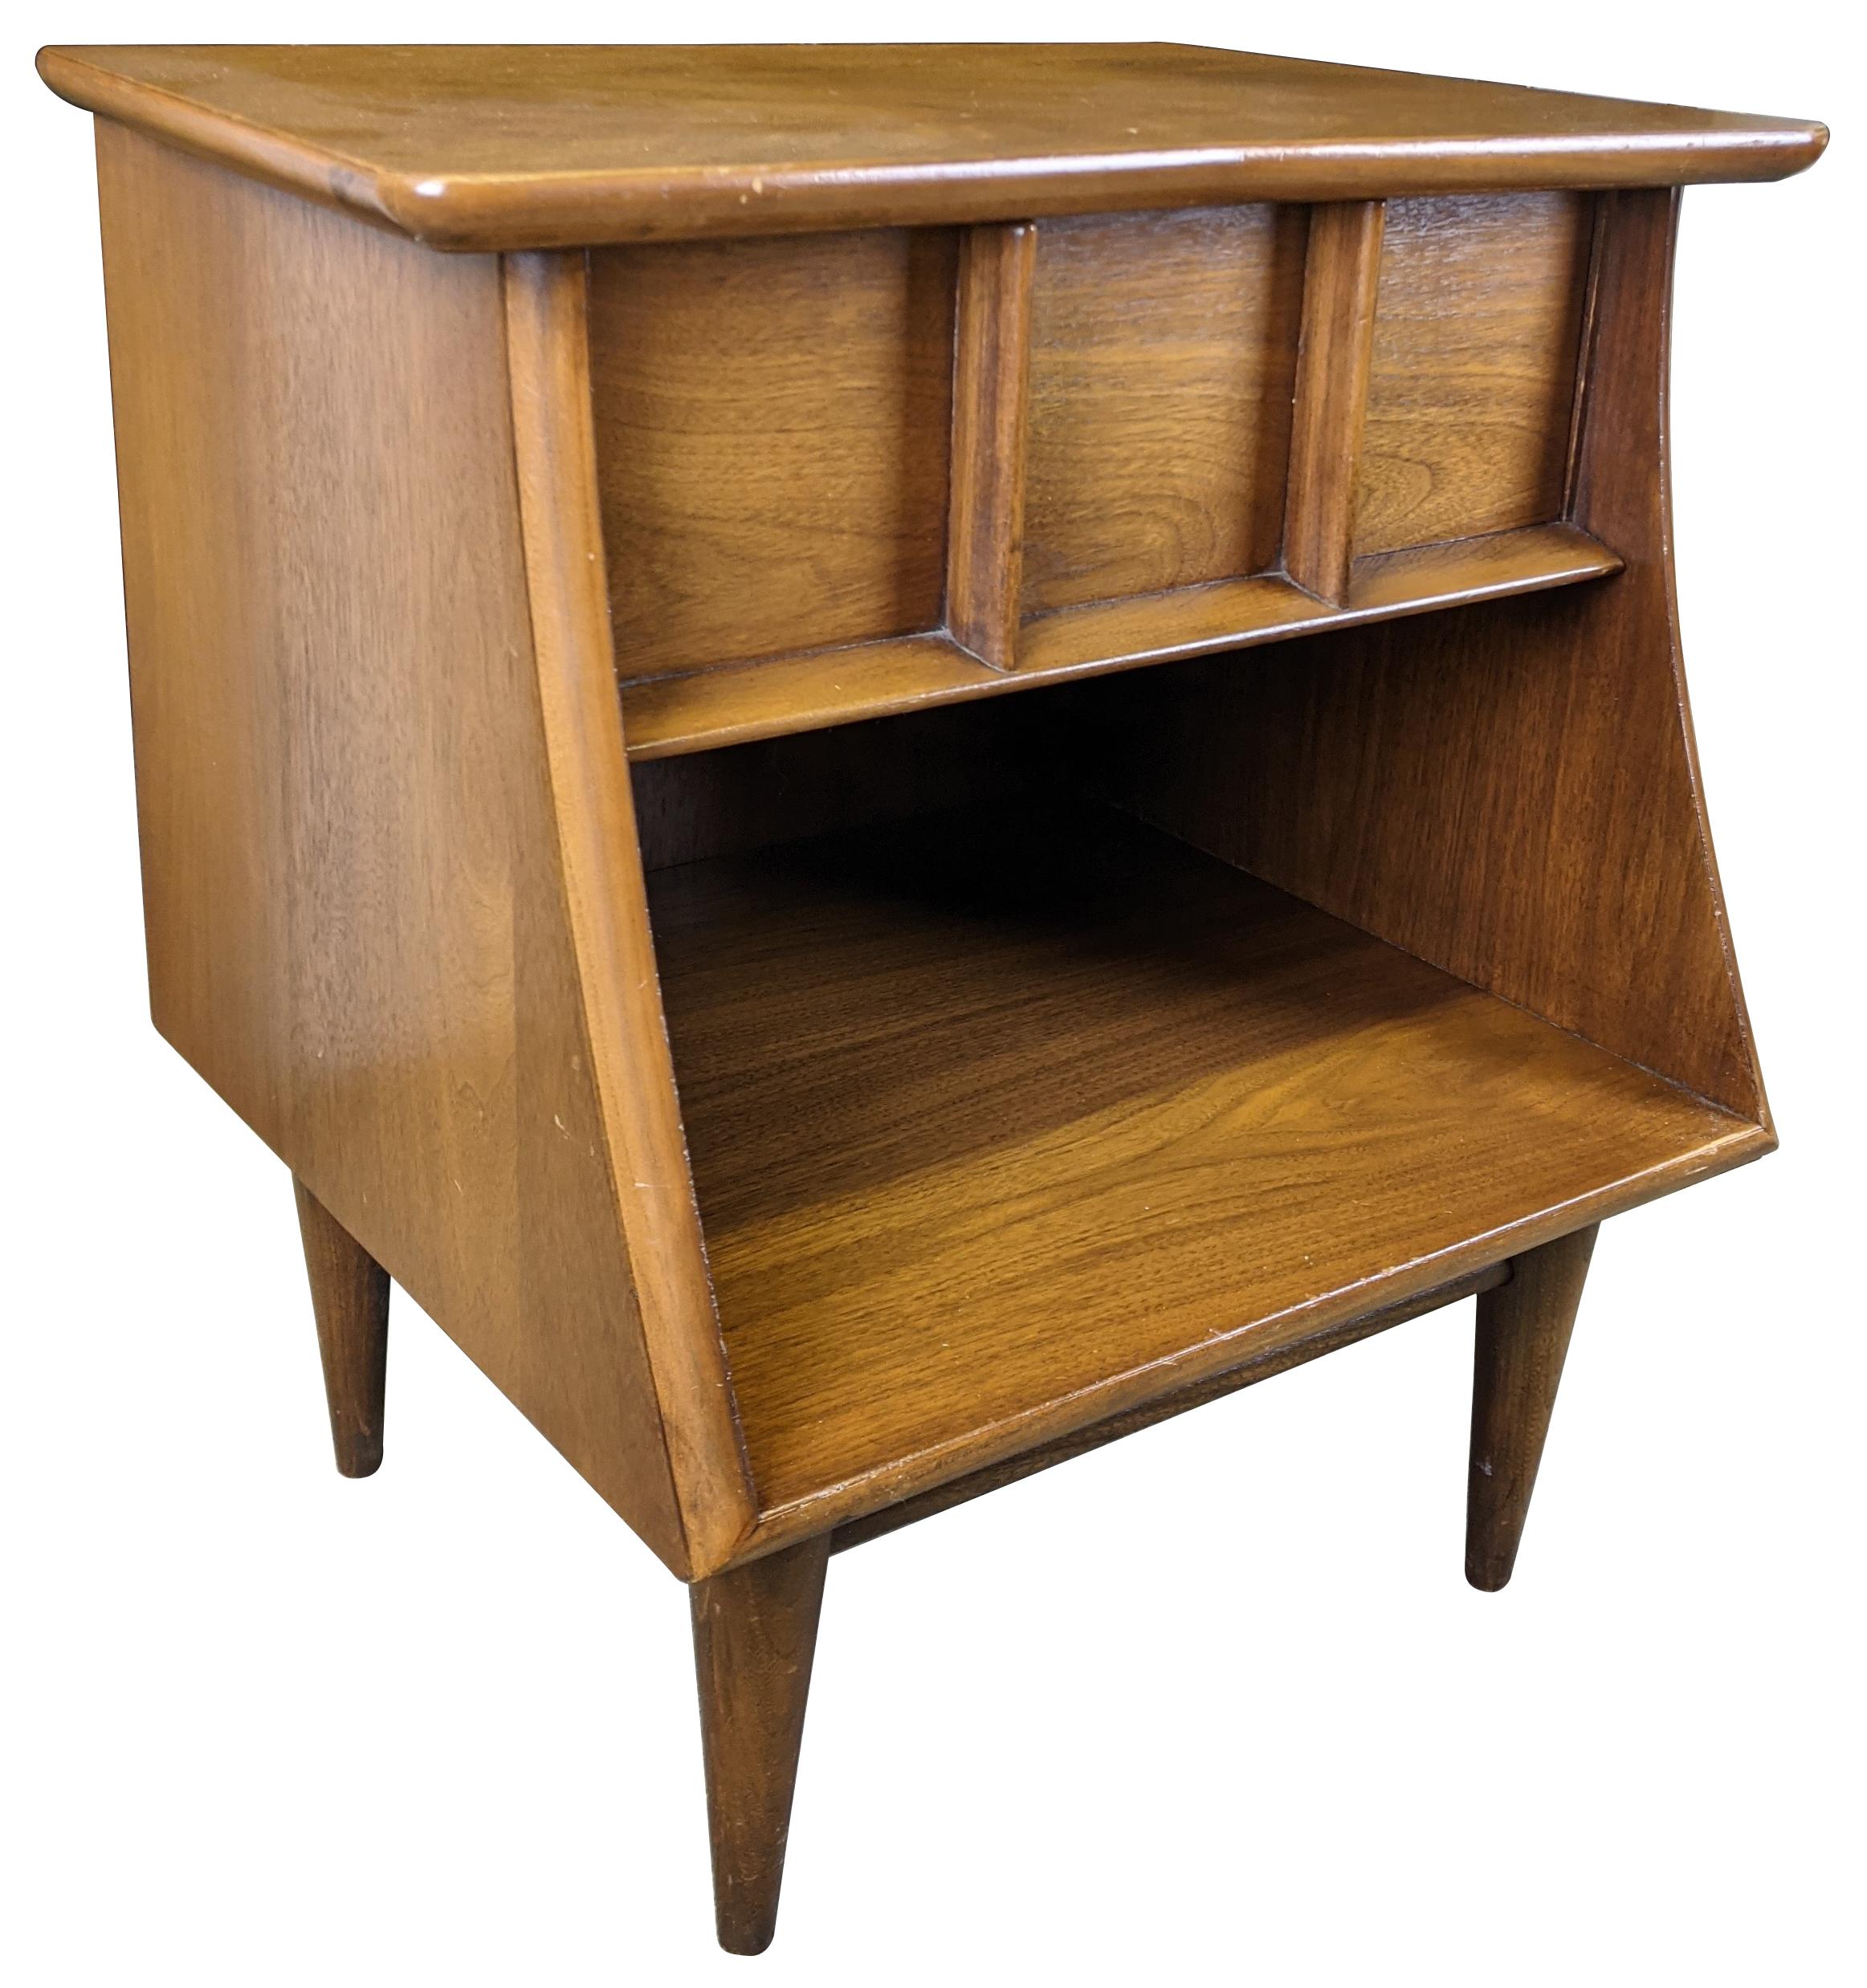 Vintage sculptural shaped nightstand or end table by Kent Coffee. Made from continental walnut with dovetailed drawer and lower cubby with tapered legs, circa 1960s. #6900.
  